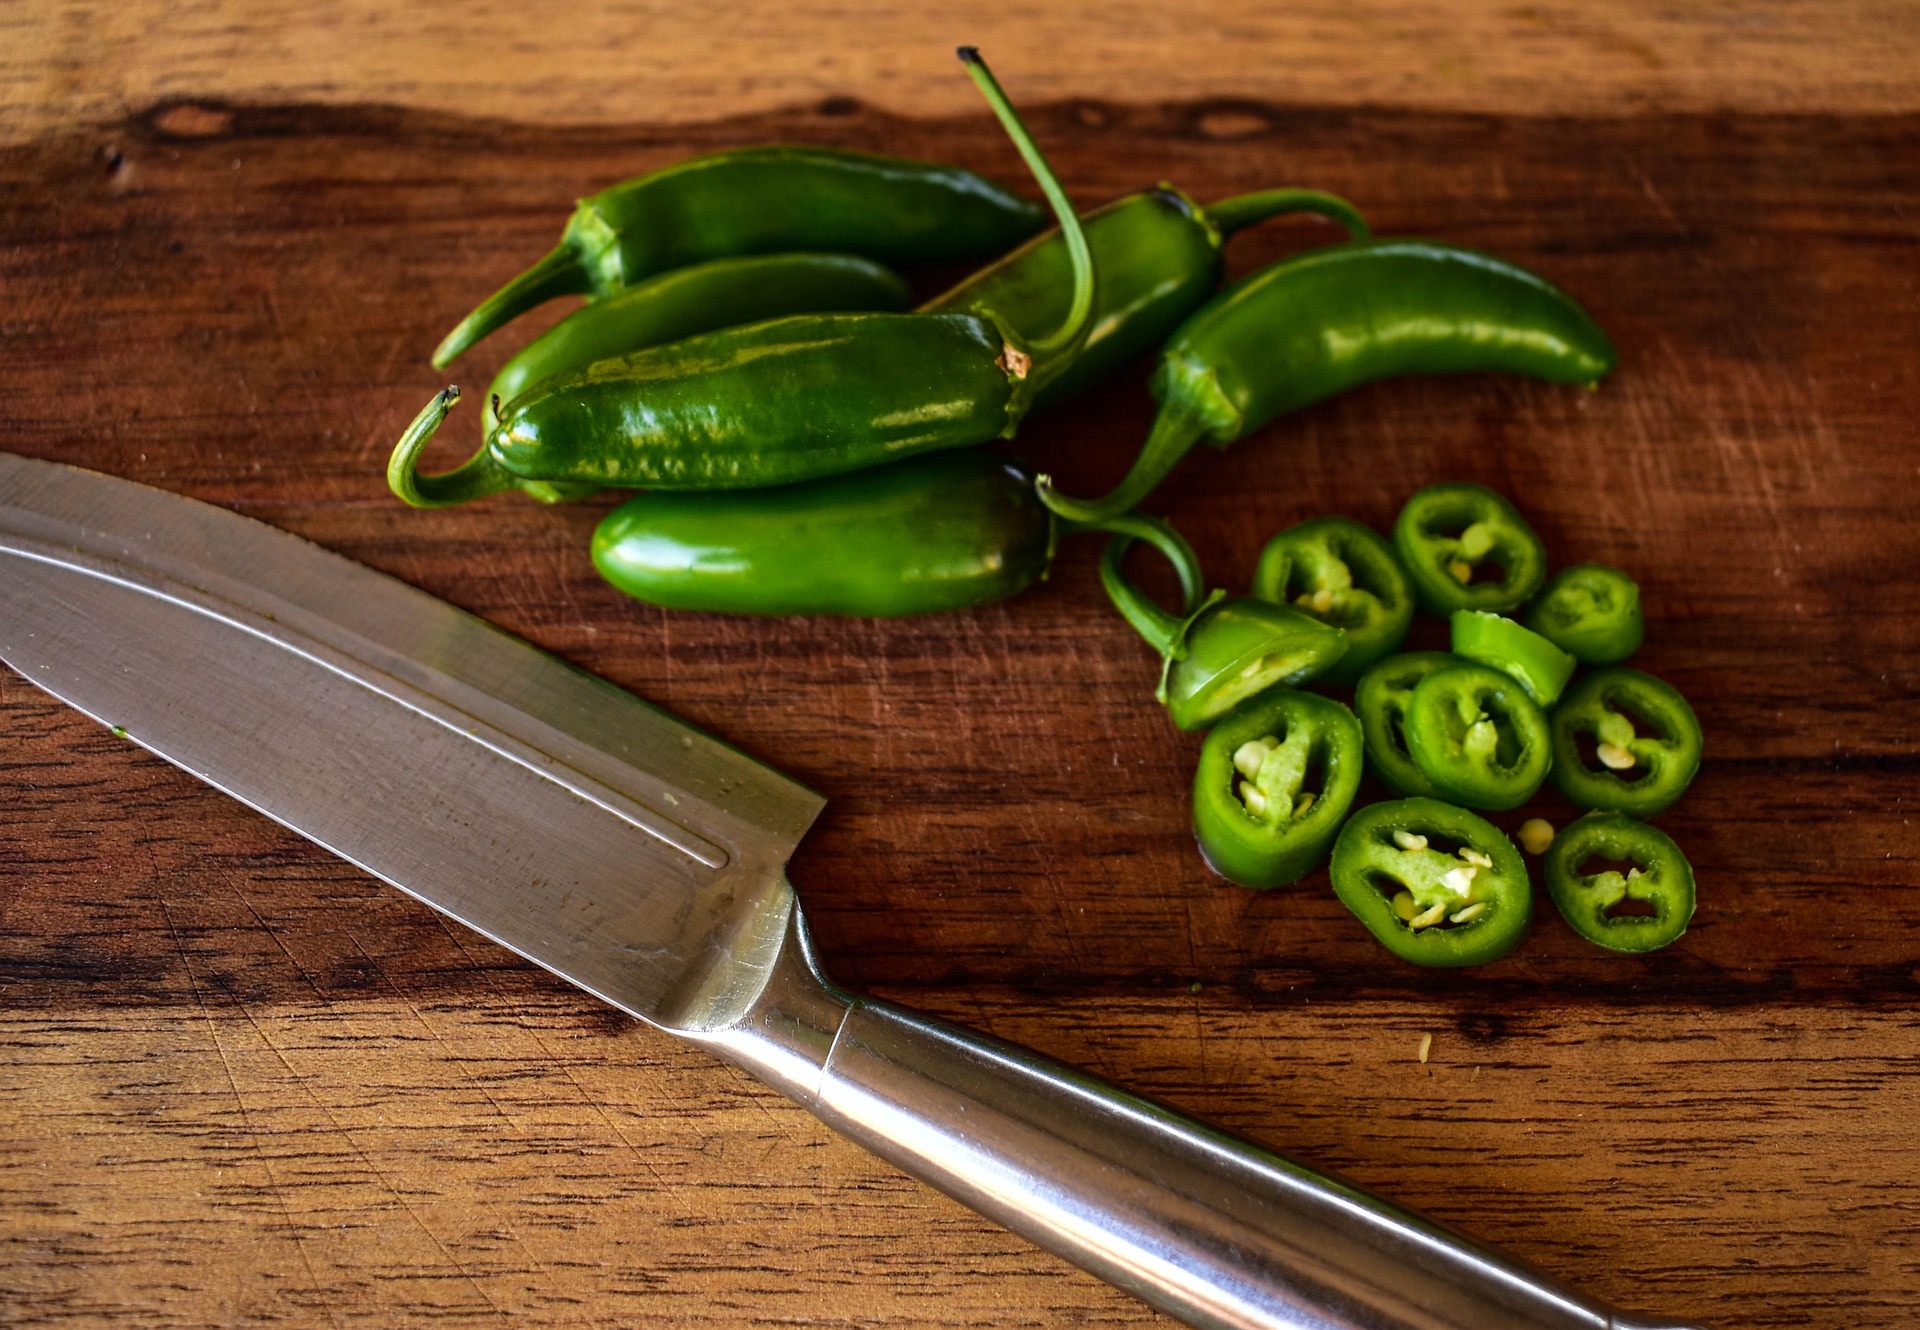 How to cook jalapenos, Culinary tips, Versatile ingredient, Flavorful possibilities, 1920x1330 HD Desktop